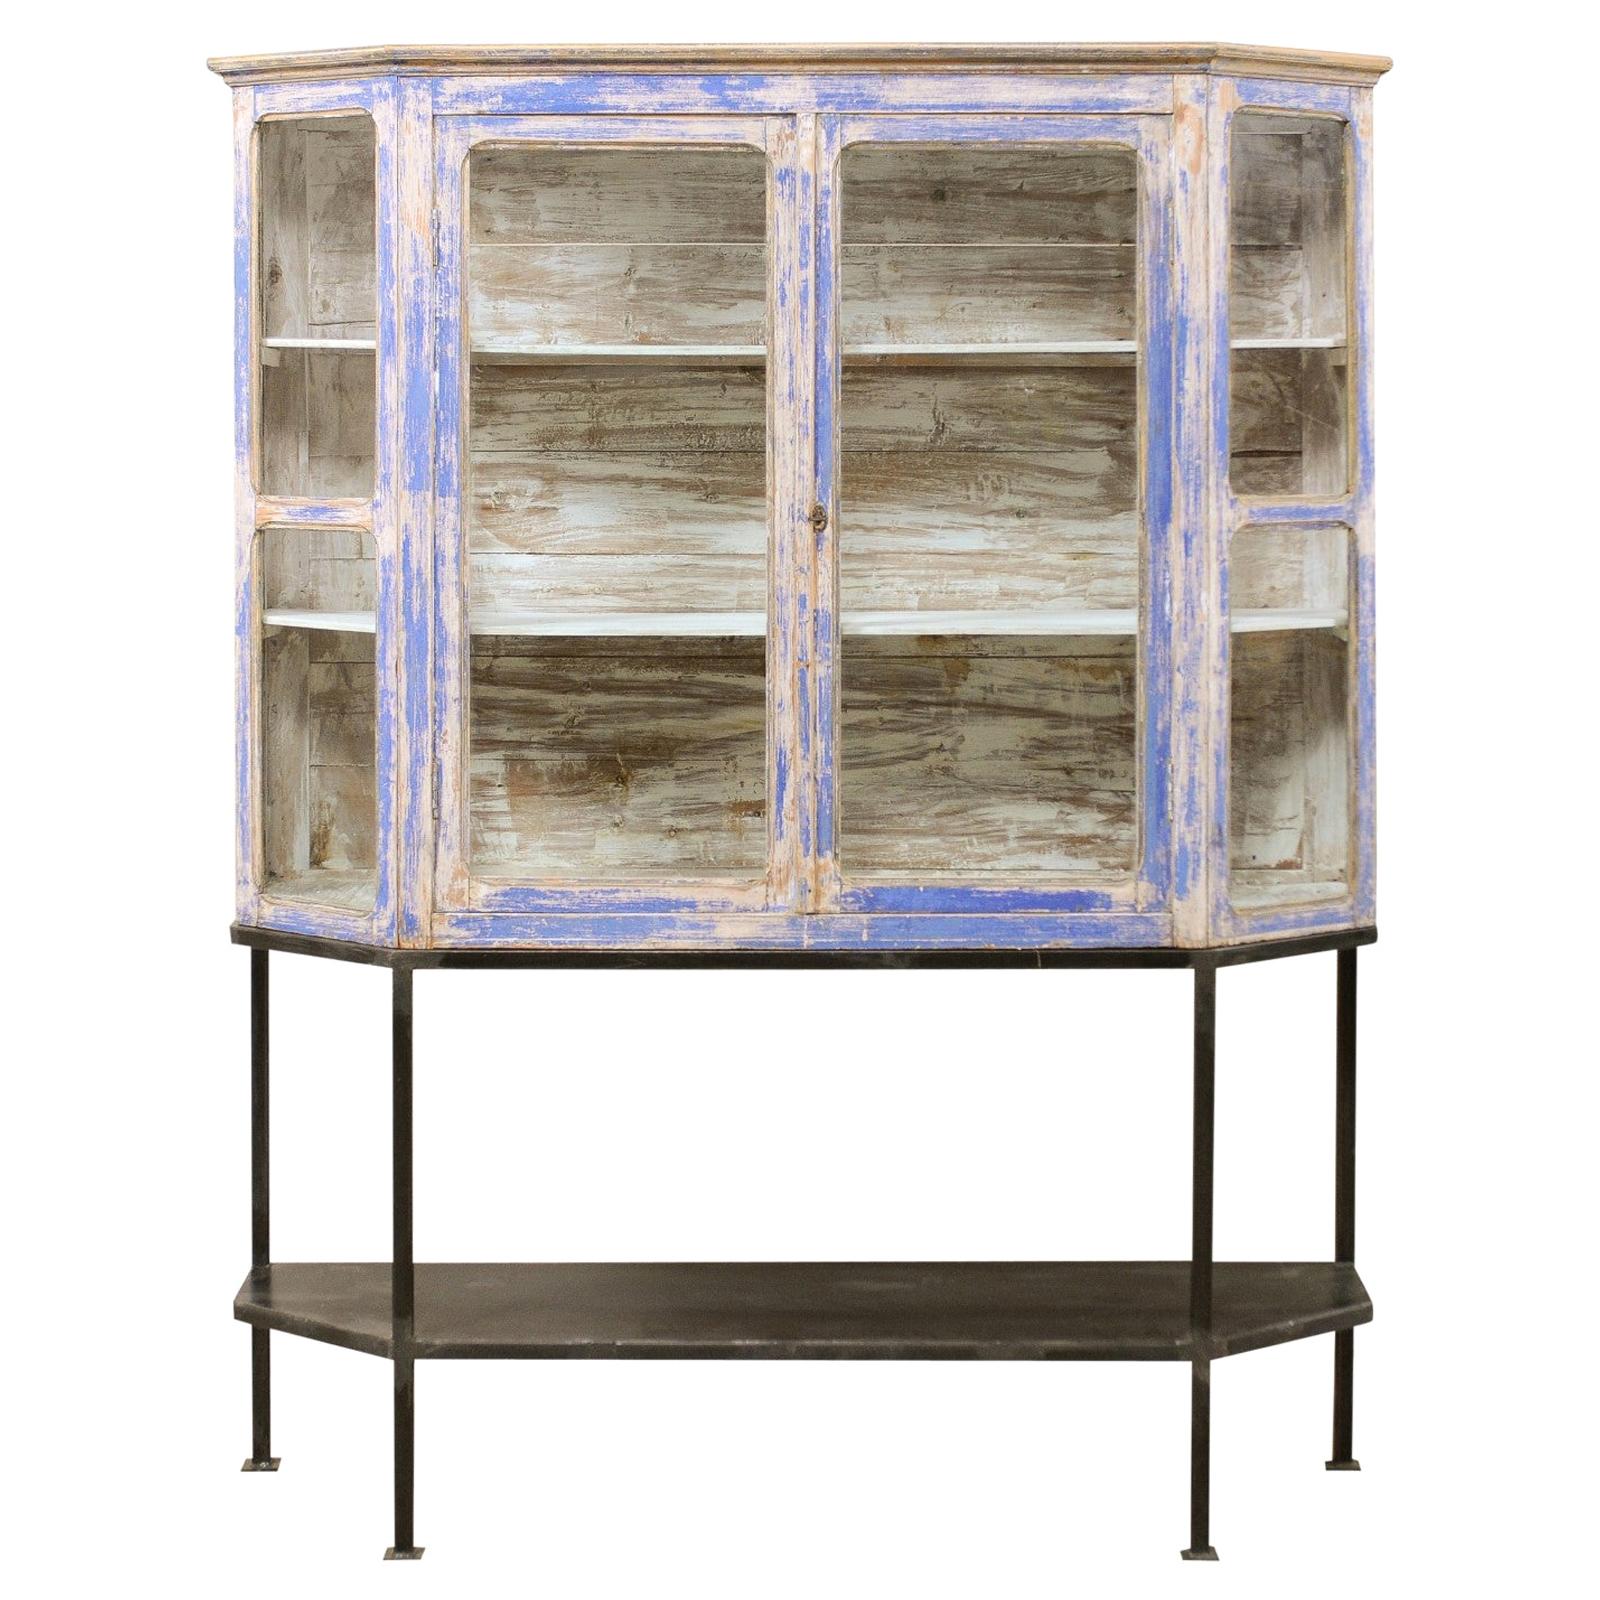 French Glass Panel Display Cabinet on Custom Iron Base with Lower Shelf